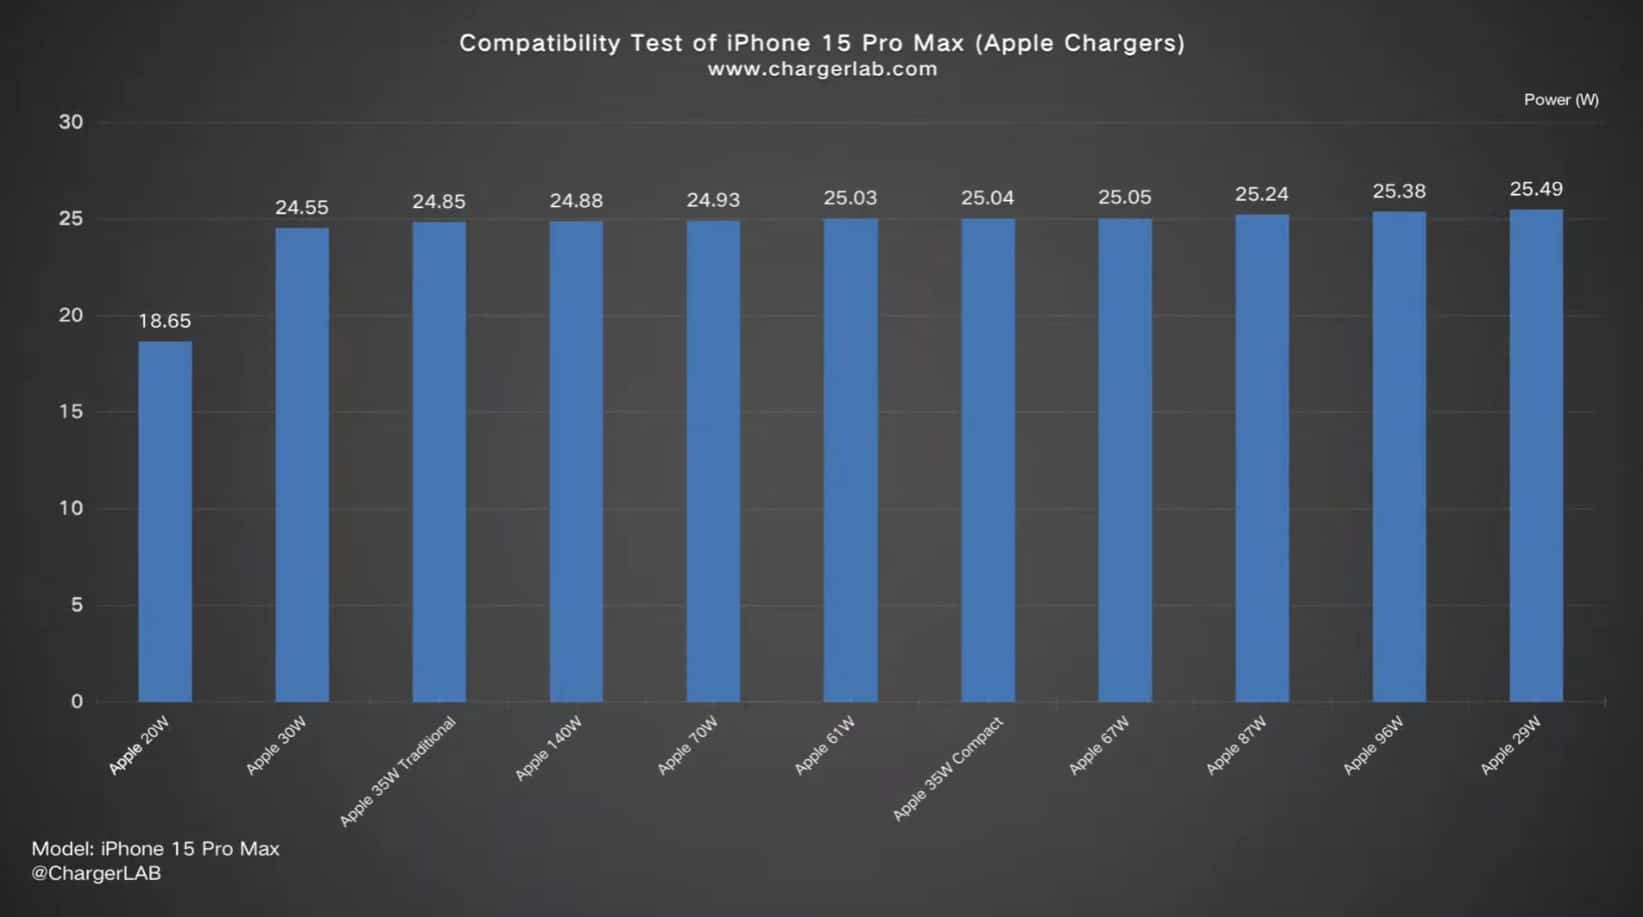 iPhone 15 Pro Max charging speeds with different accessories used